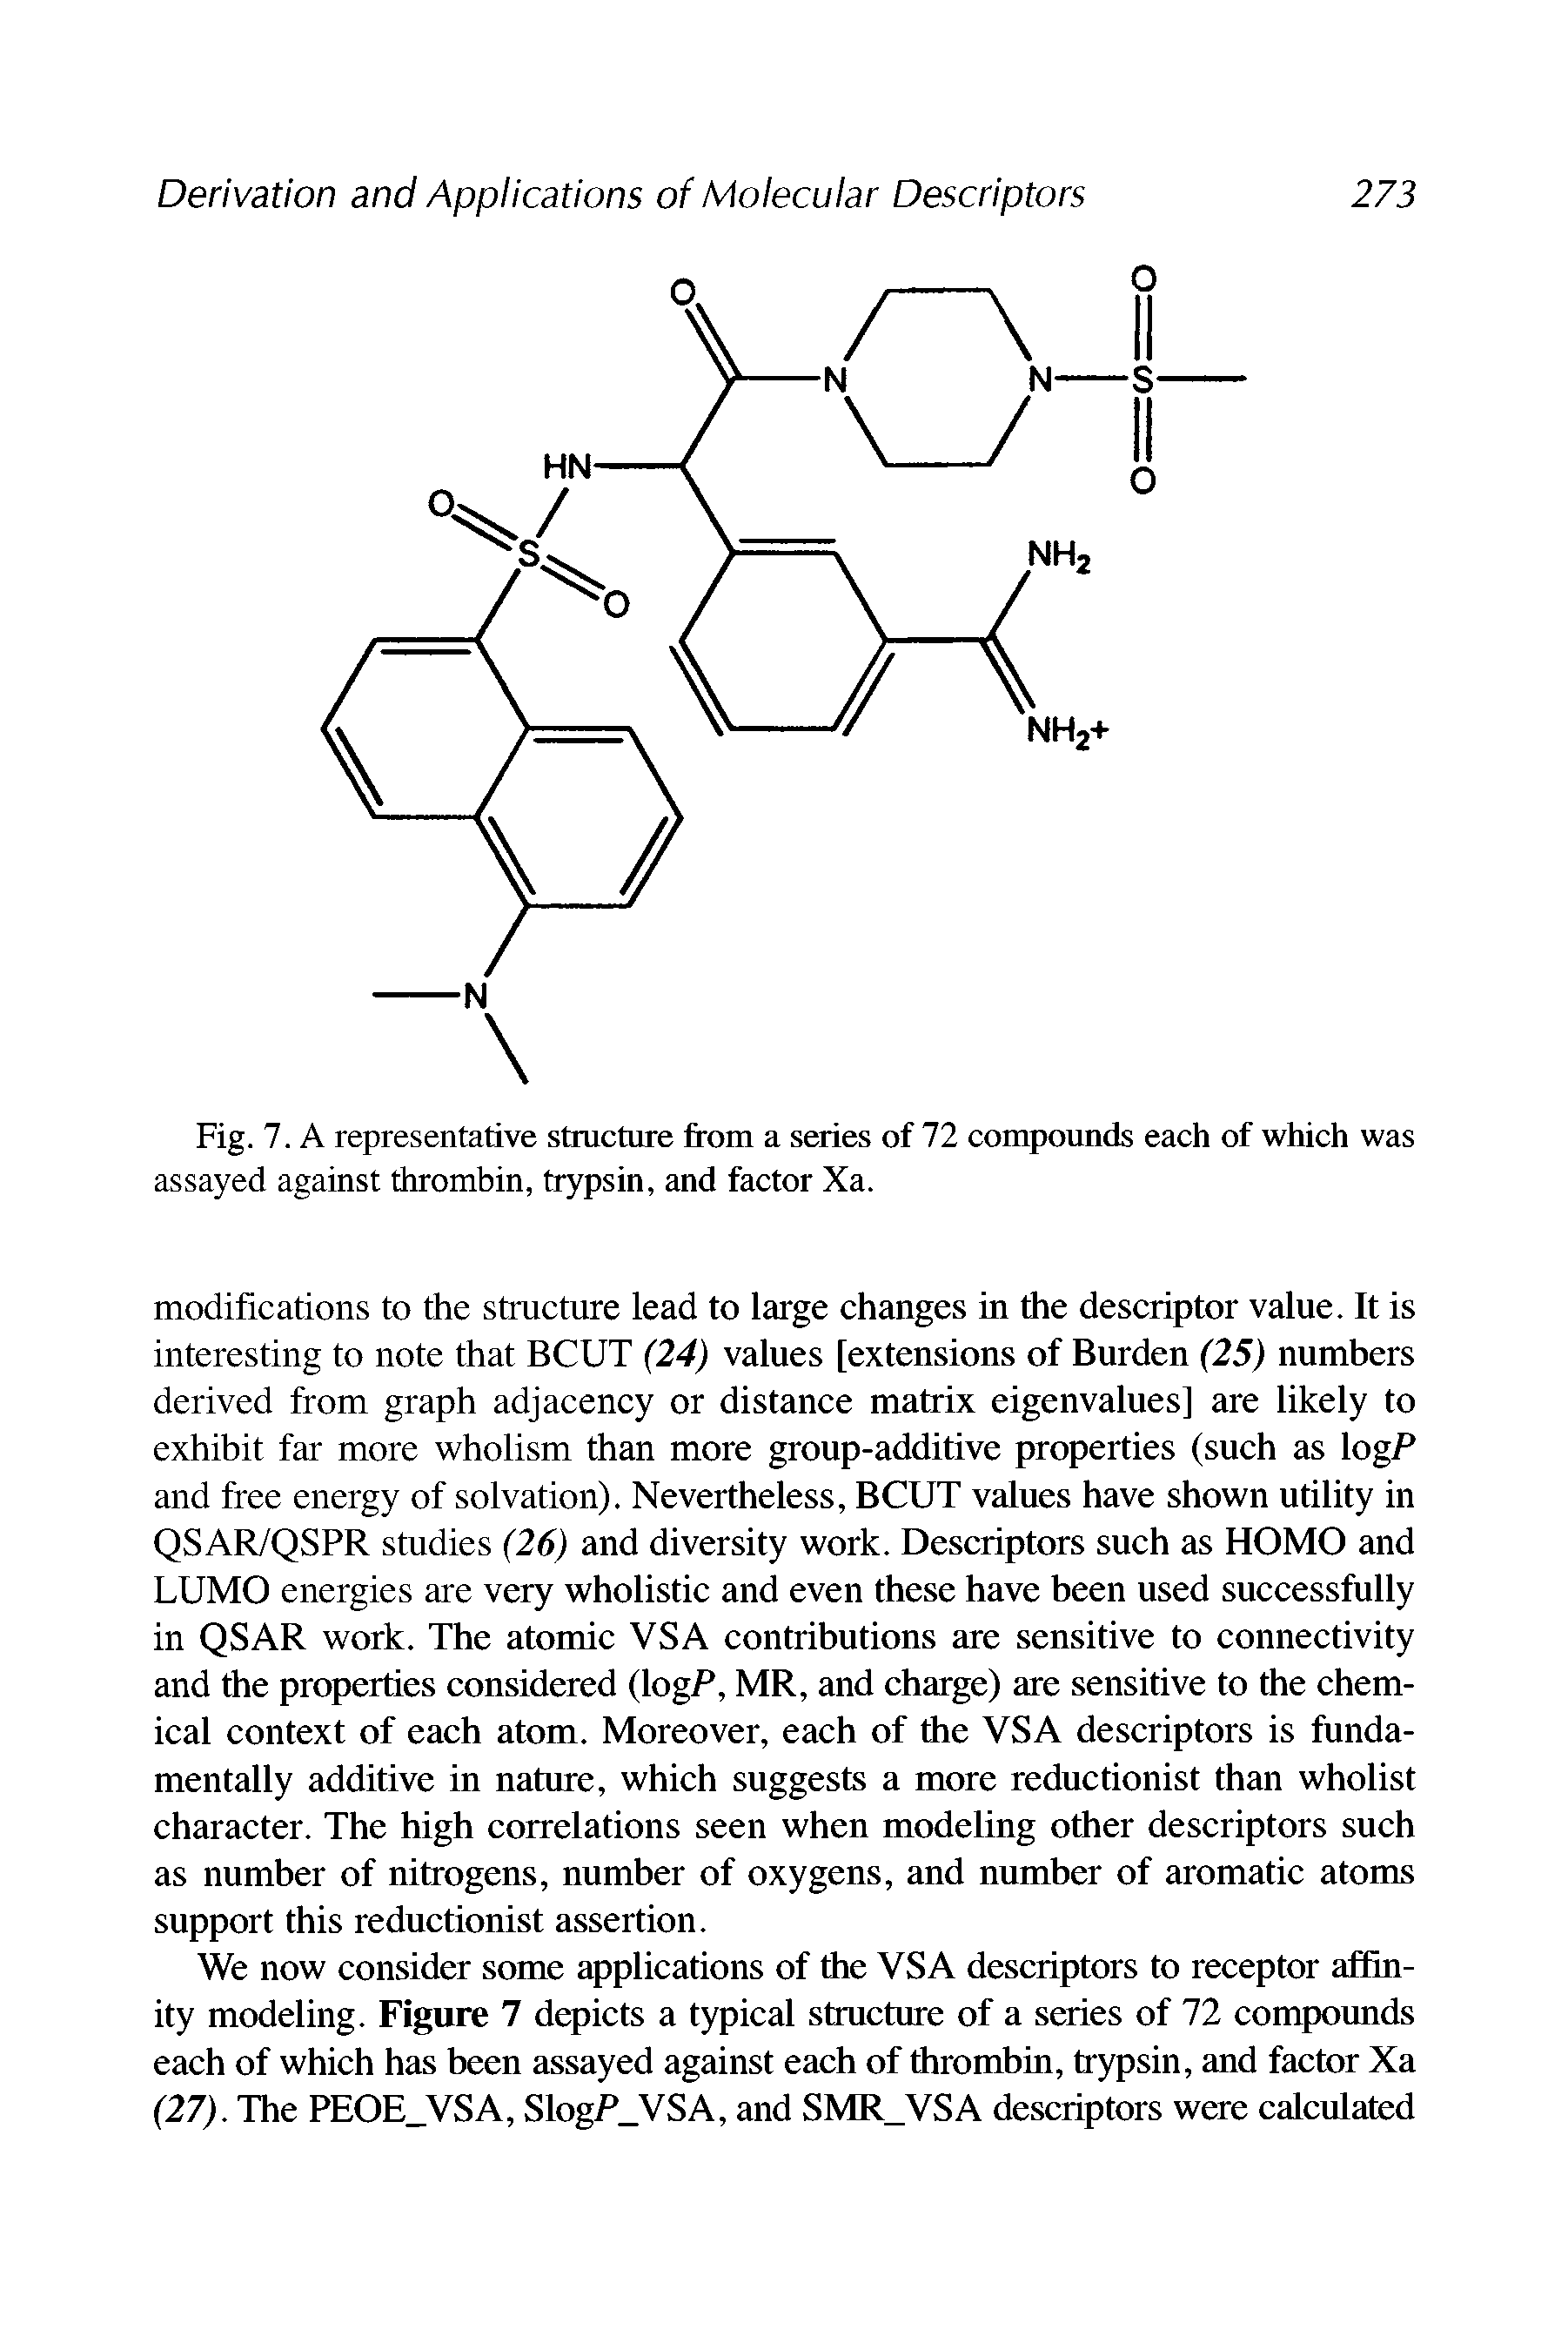 Fig. 7. A representative structure from a series of 72 compounds each of which was assayed against thrombin, trypsin, and factor Xa.